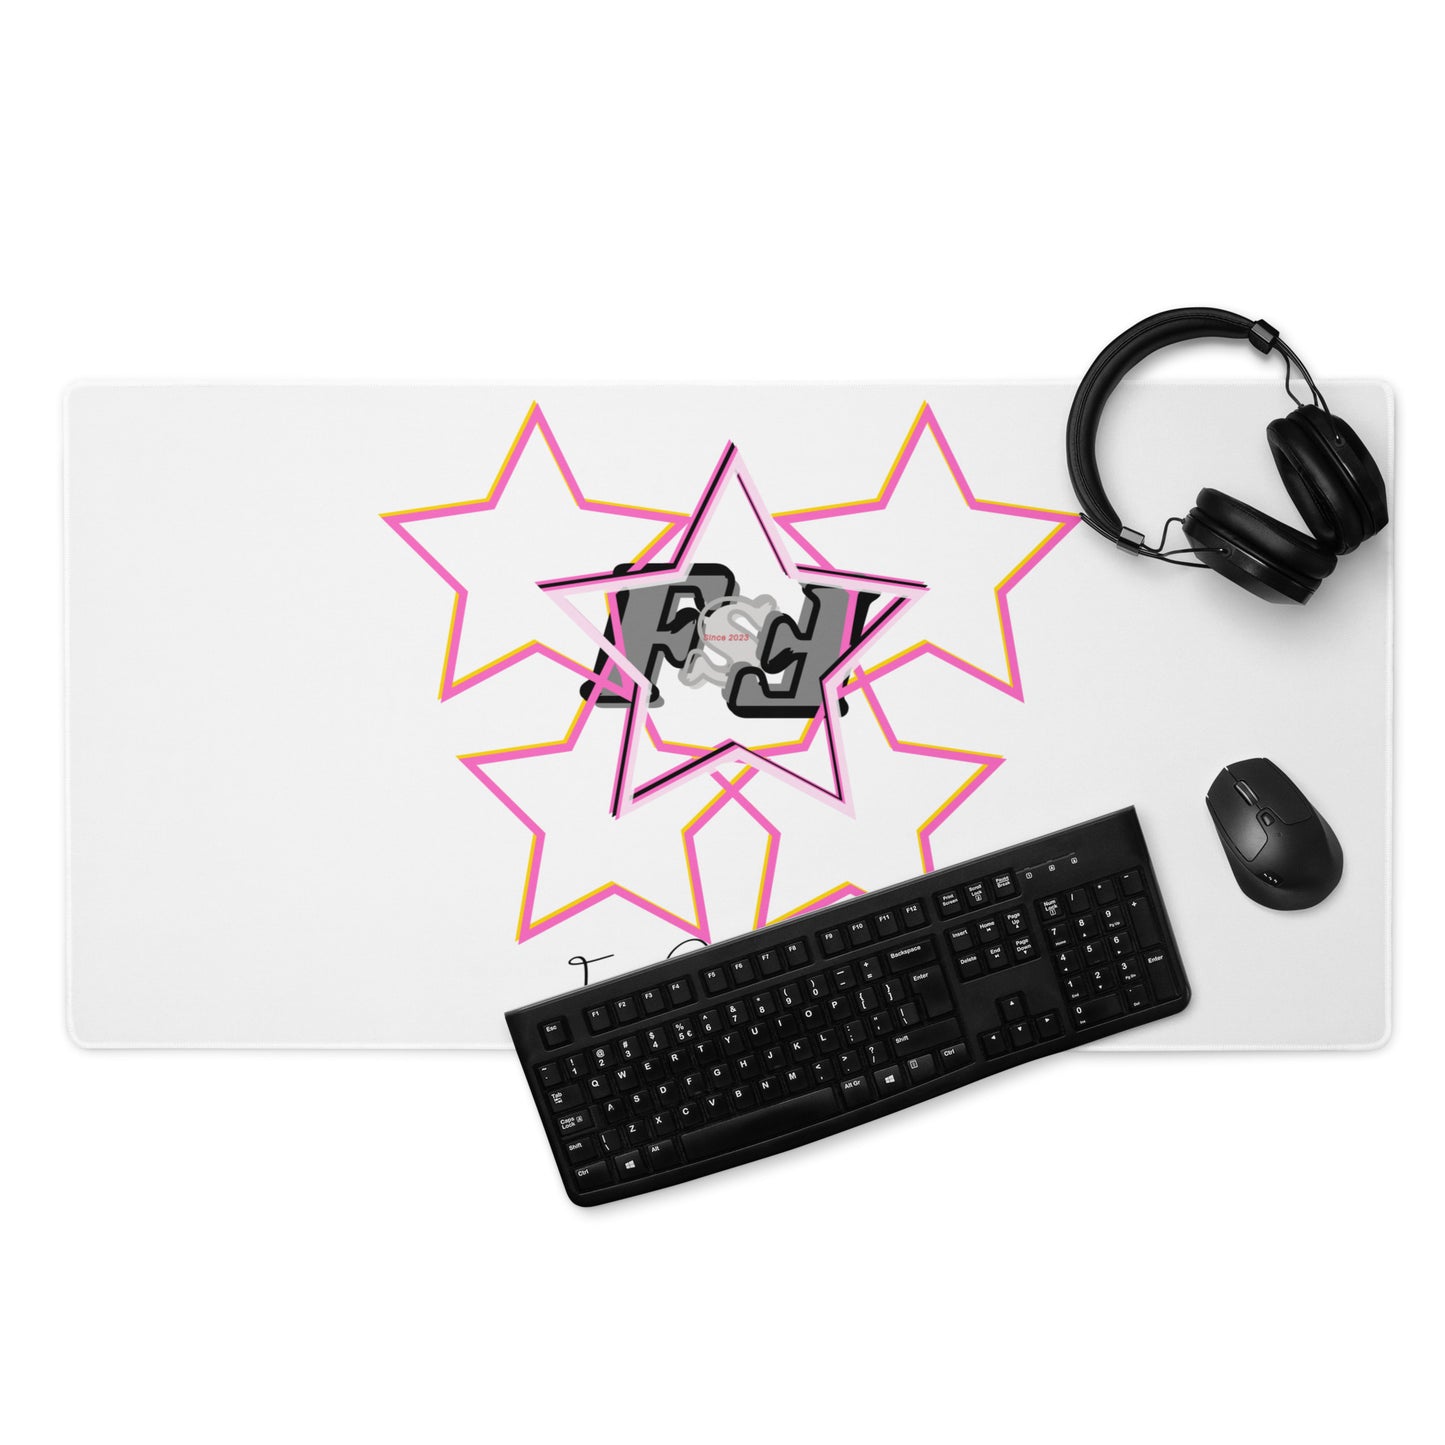 'Pink' Starz - Five Star Fresh Gaming mouse pad